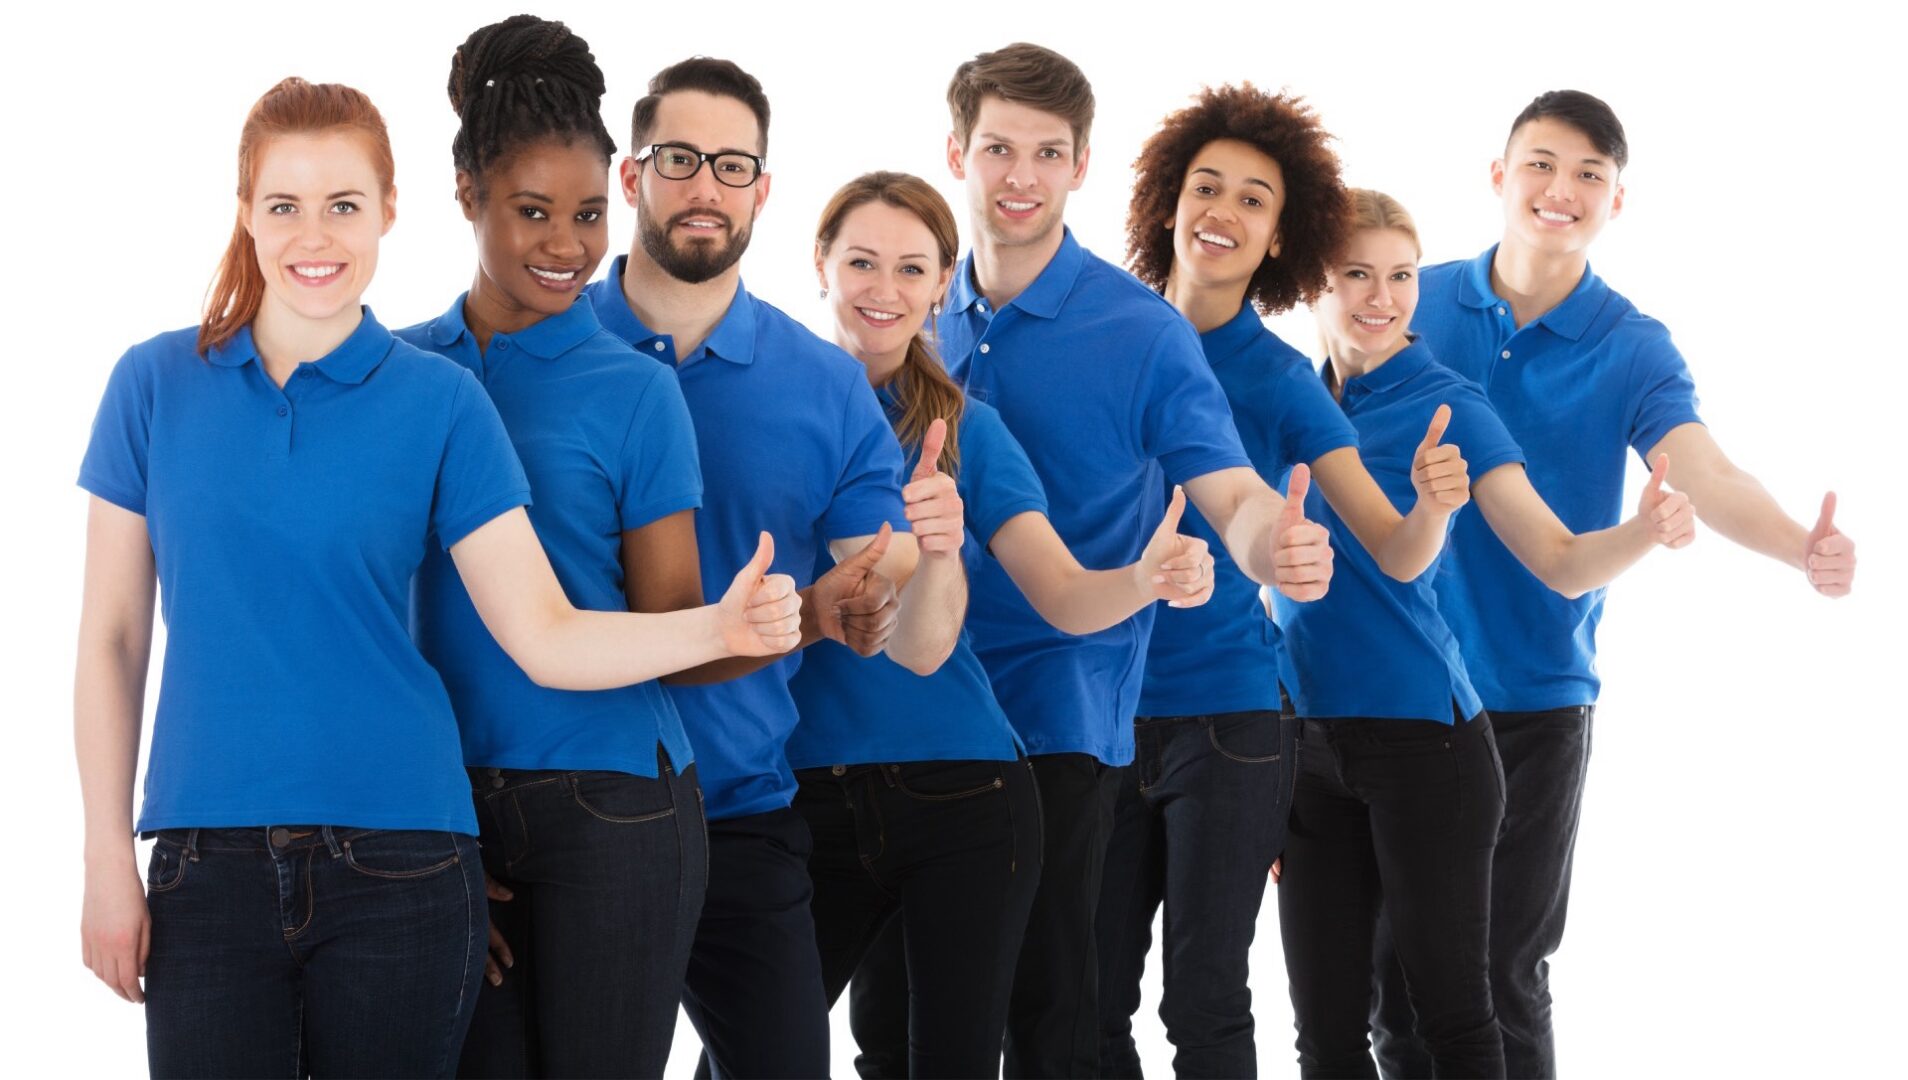 A group of people in blue shirts giving thumbs up.